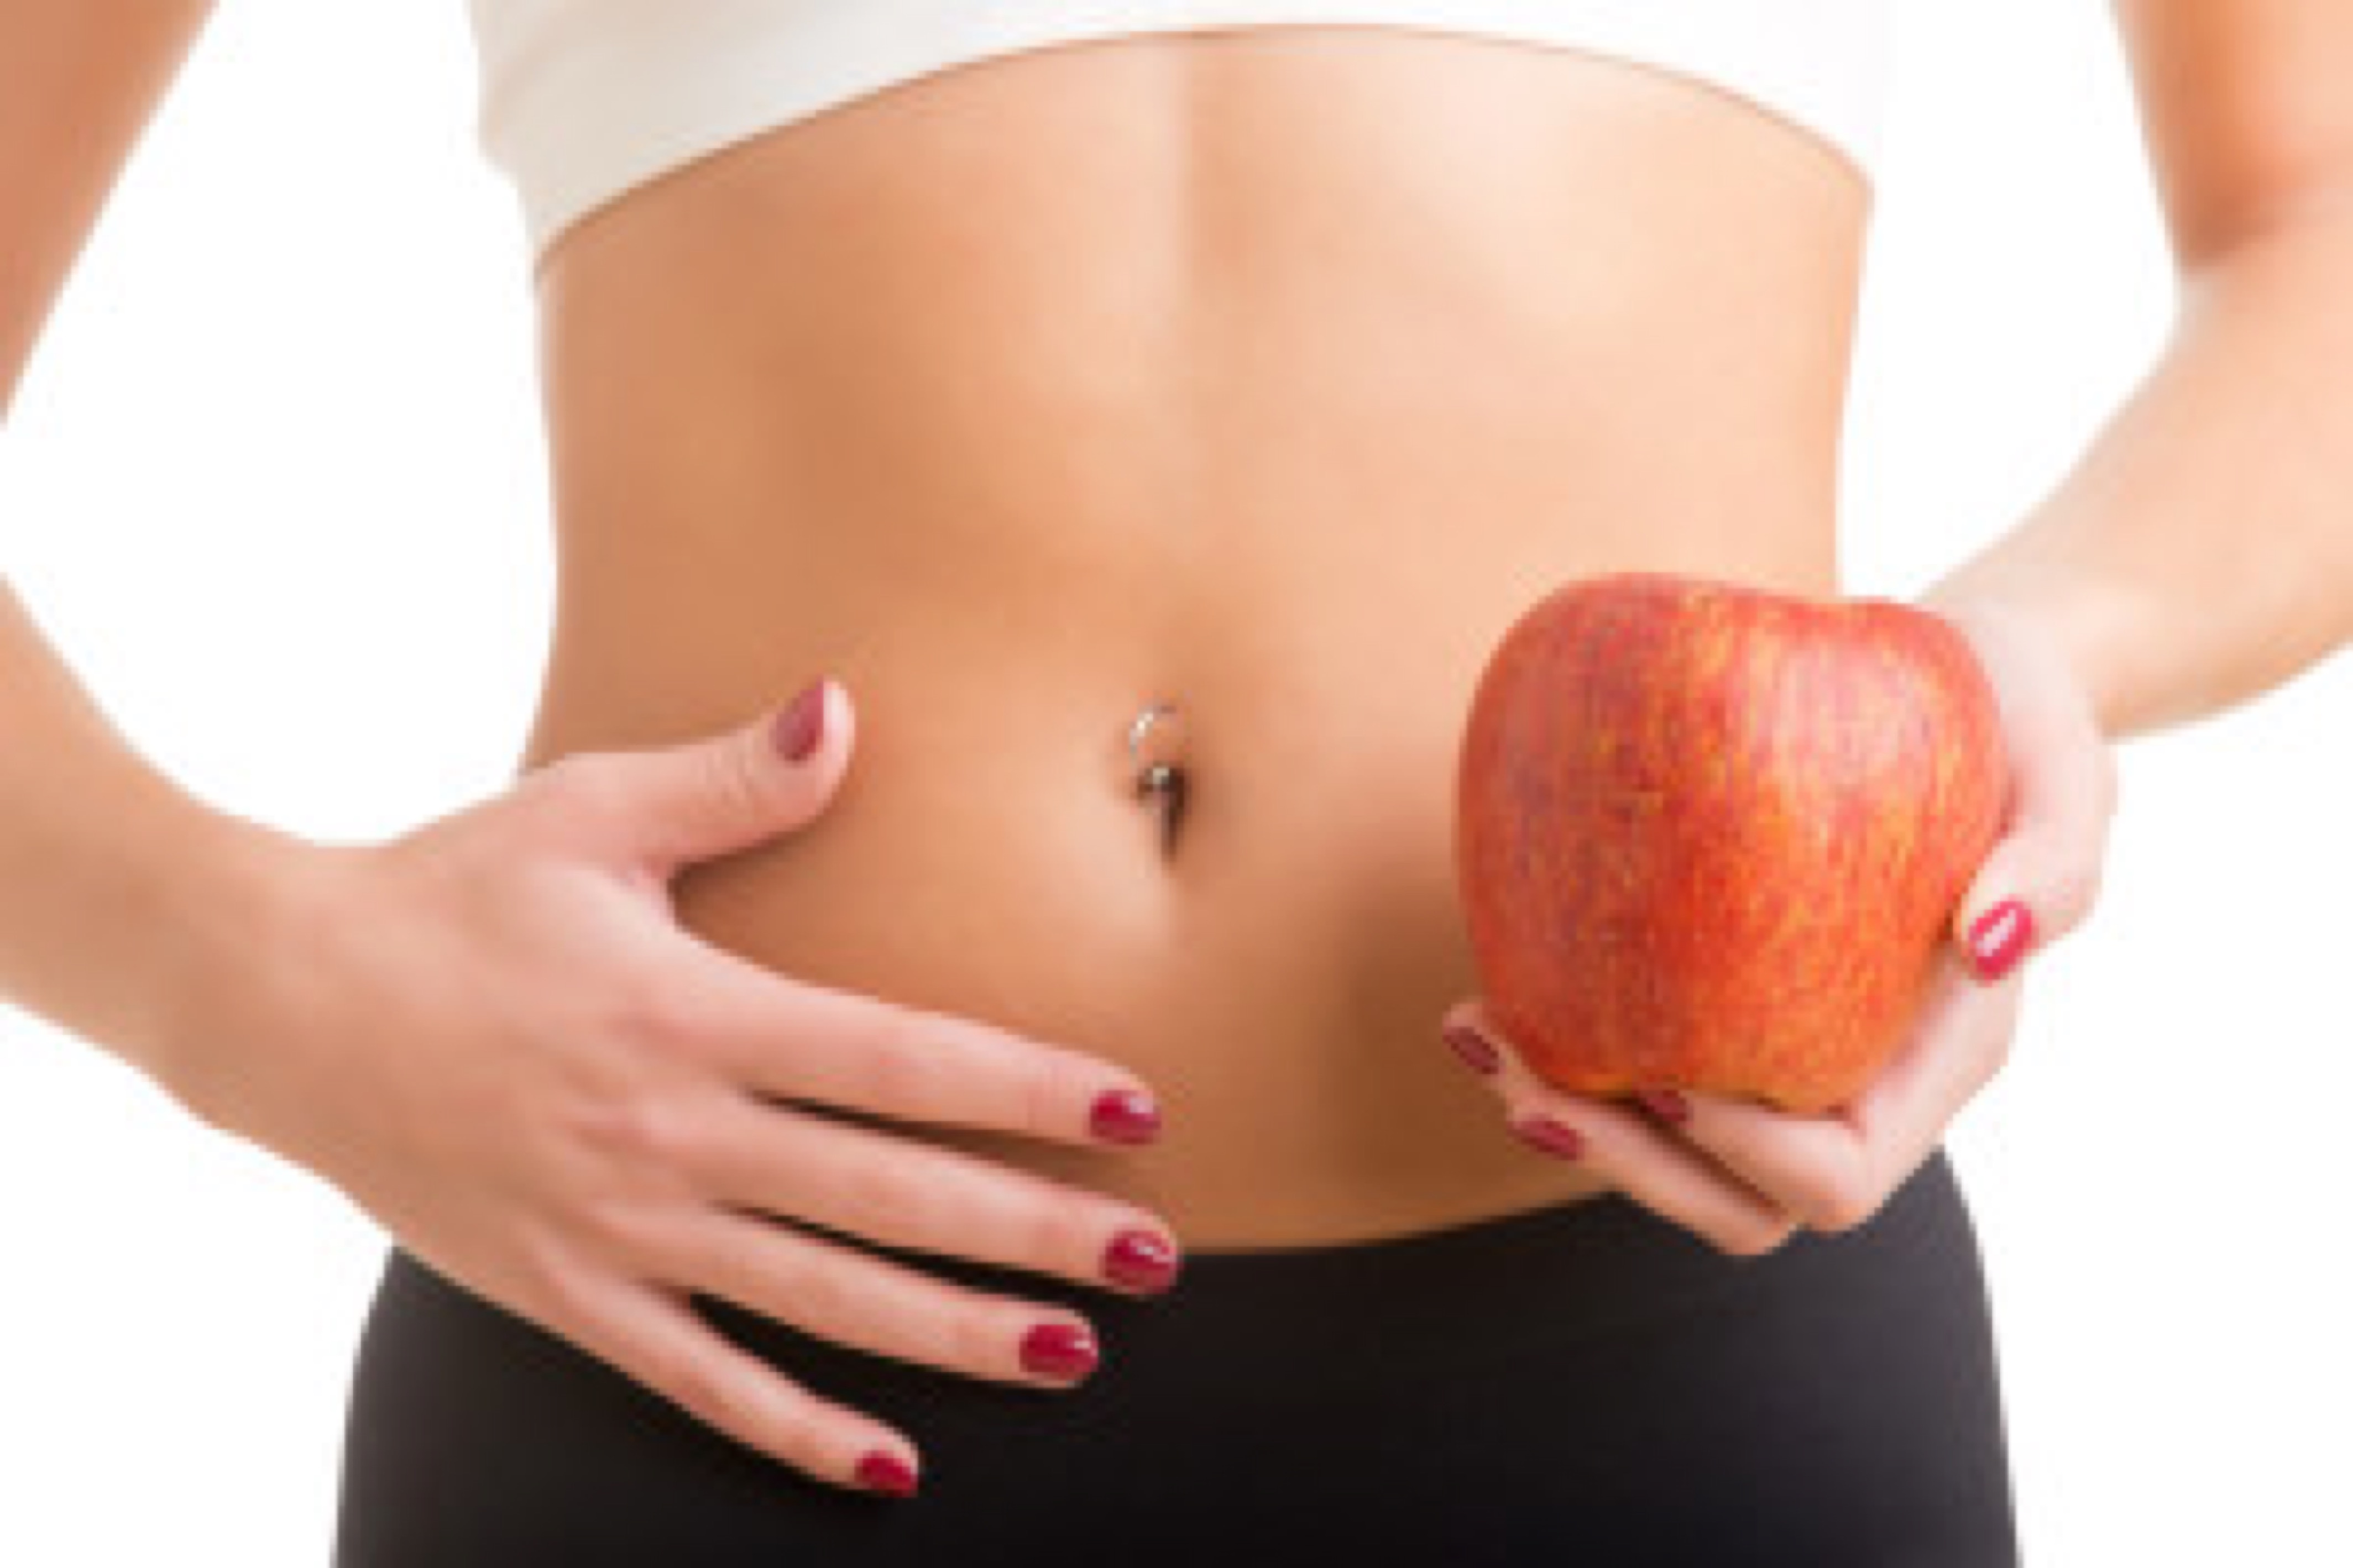 Woman holding an apple with a hand on her abdomen. Focus on the apple.